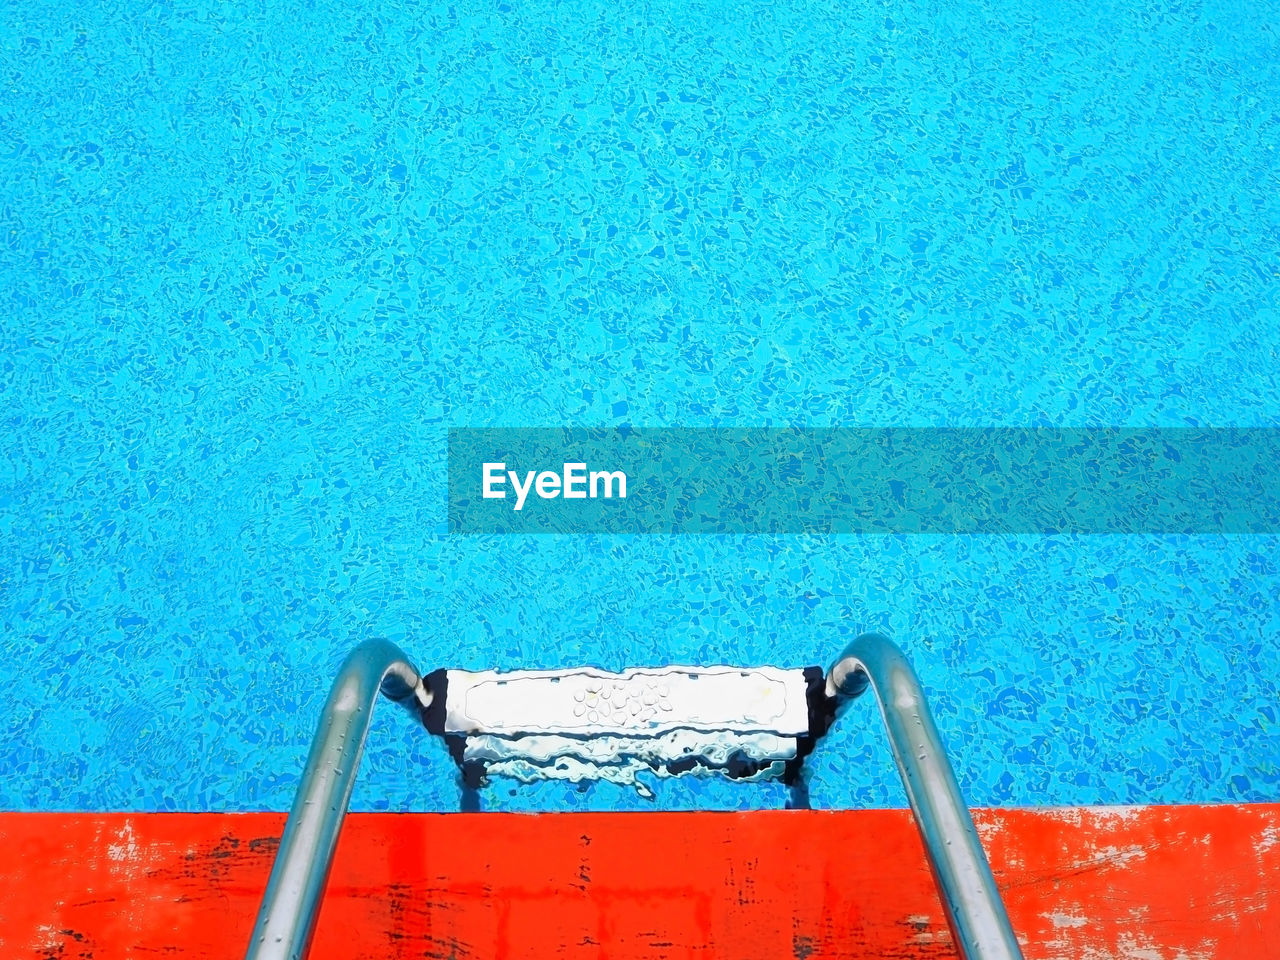 High angle view of stainless steel ladder in swimming pool